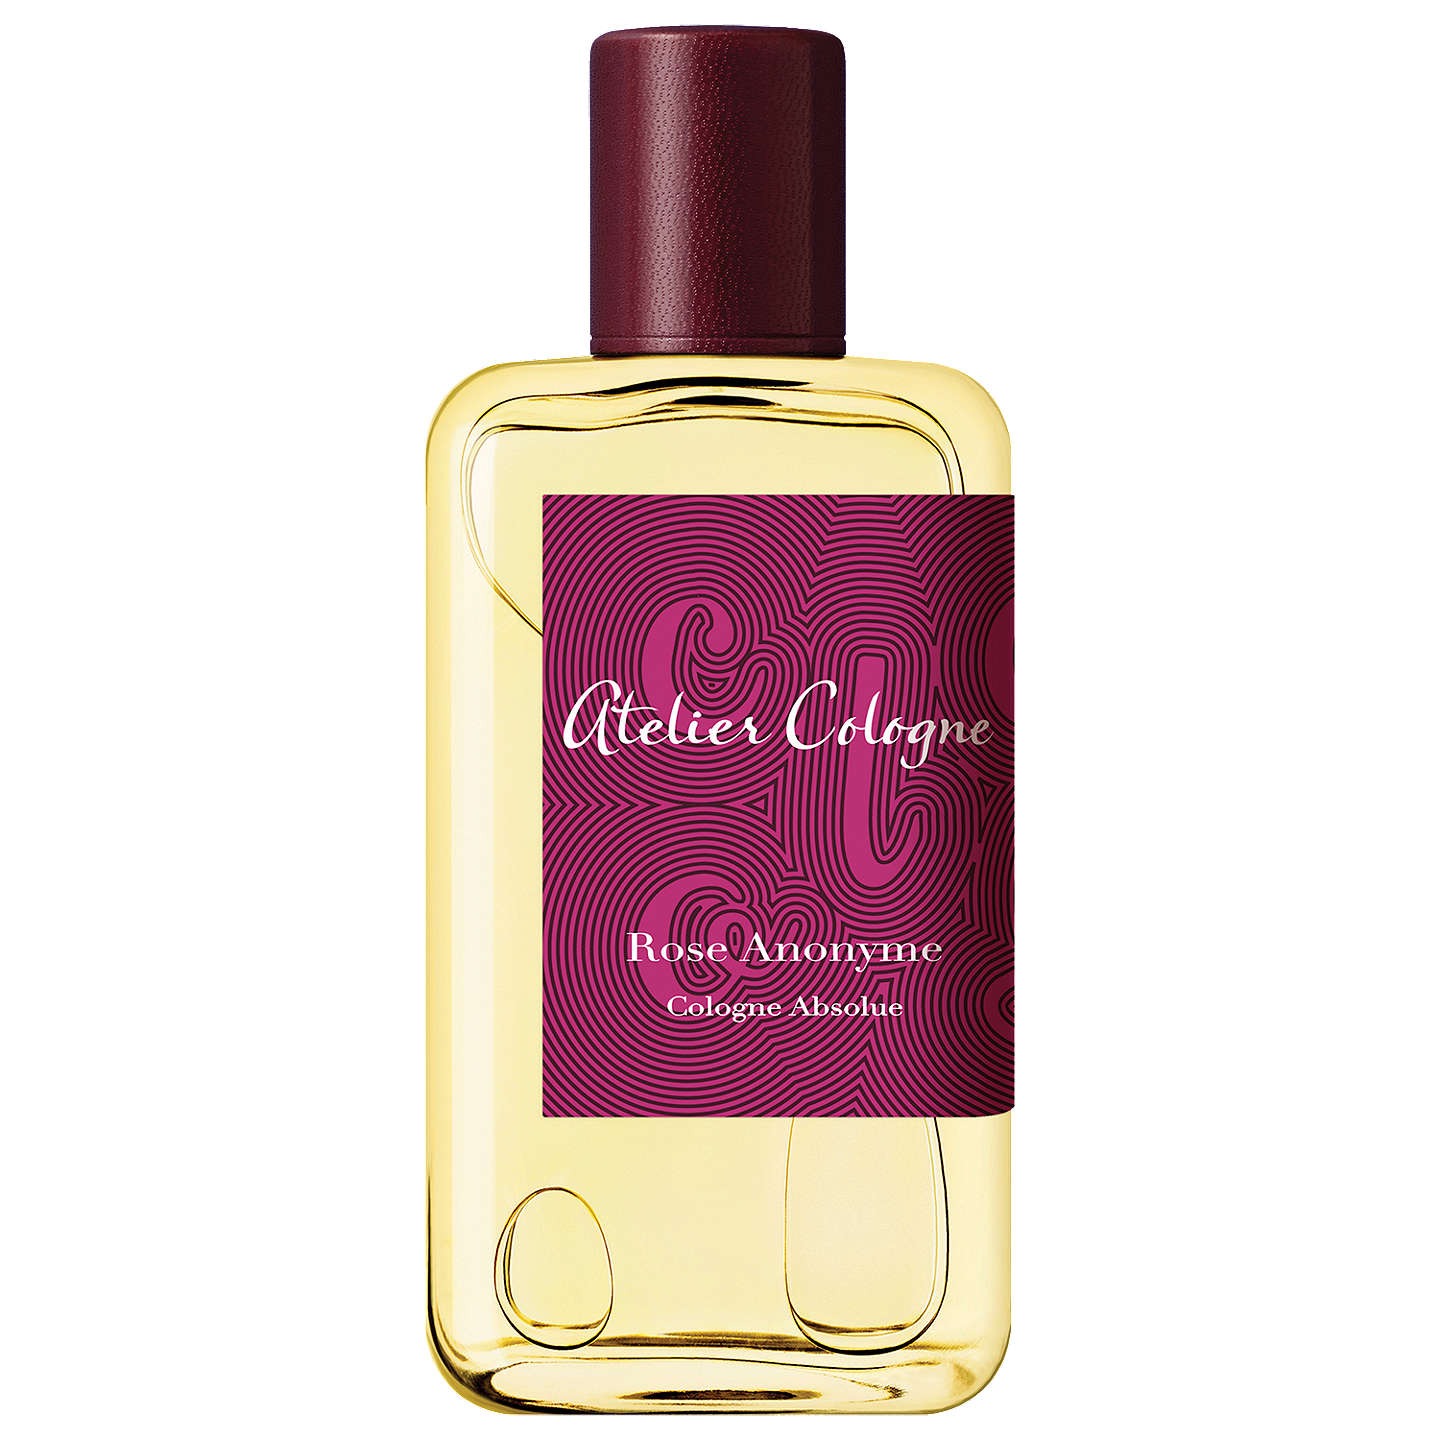 ATELIER COLOGNE ROSE ANONYME